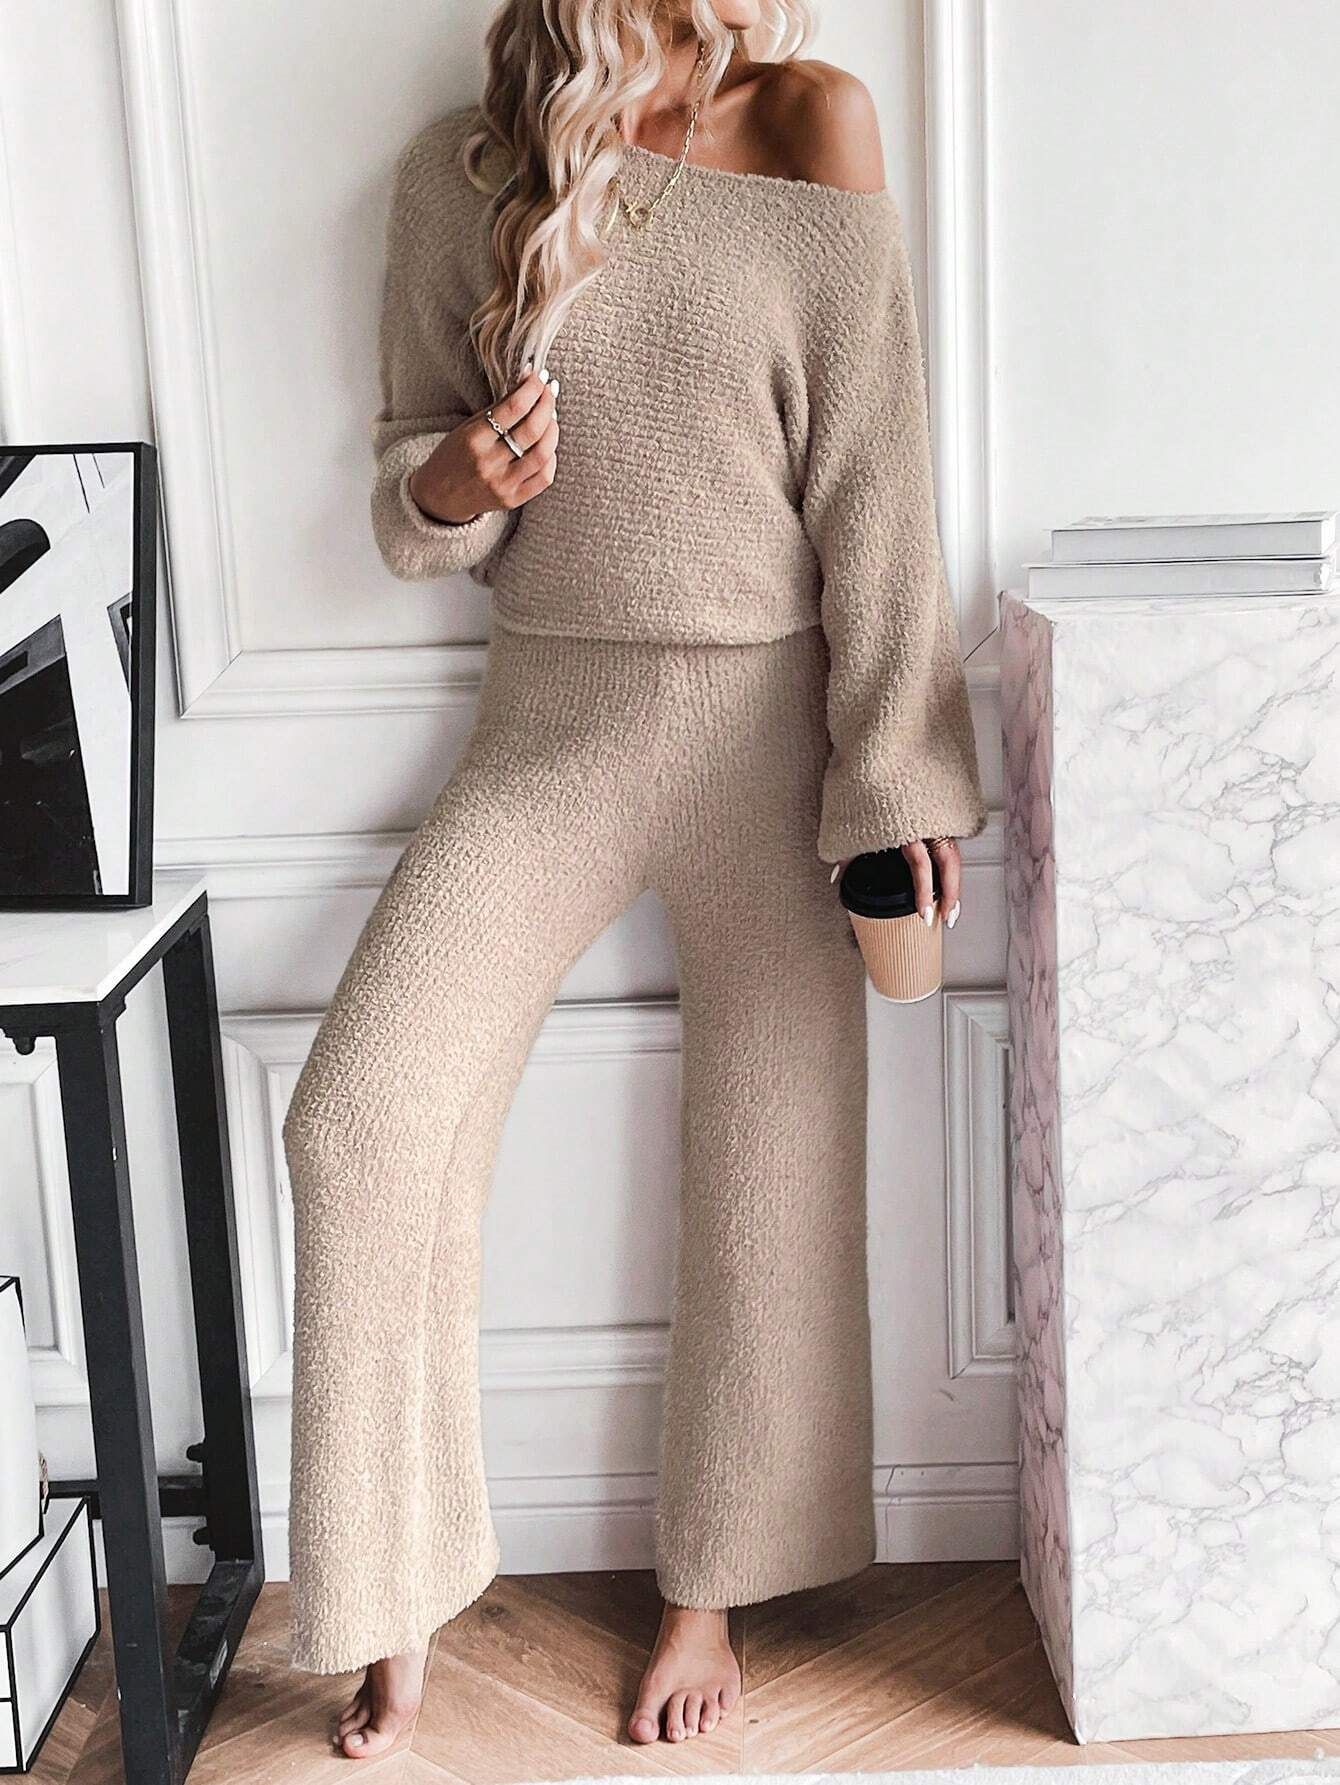 SHEIN Frenchy Batwing Sleeve Sweater & Knit Pants | SHEIN